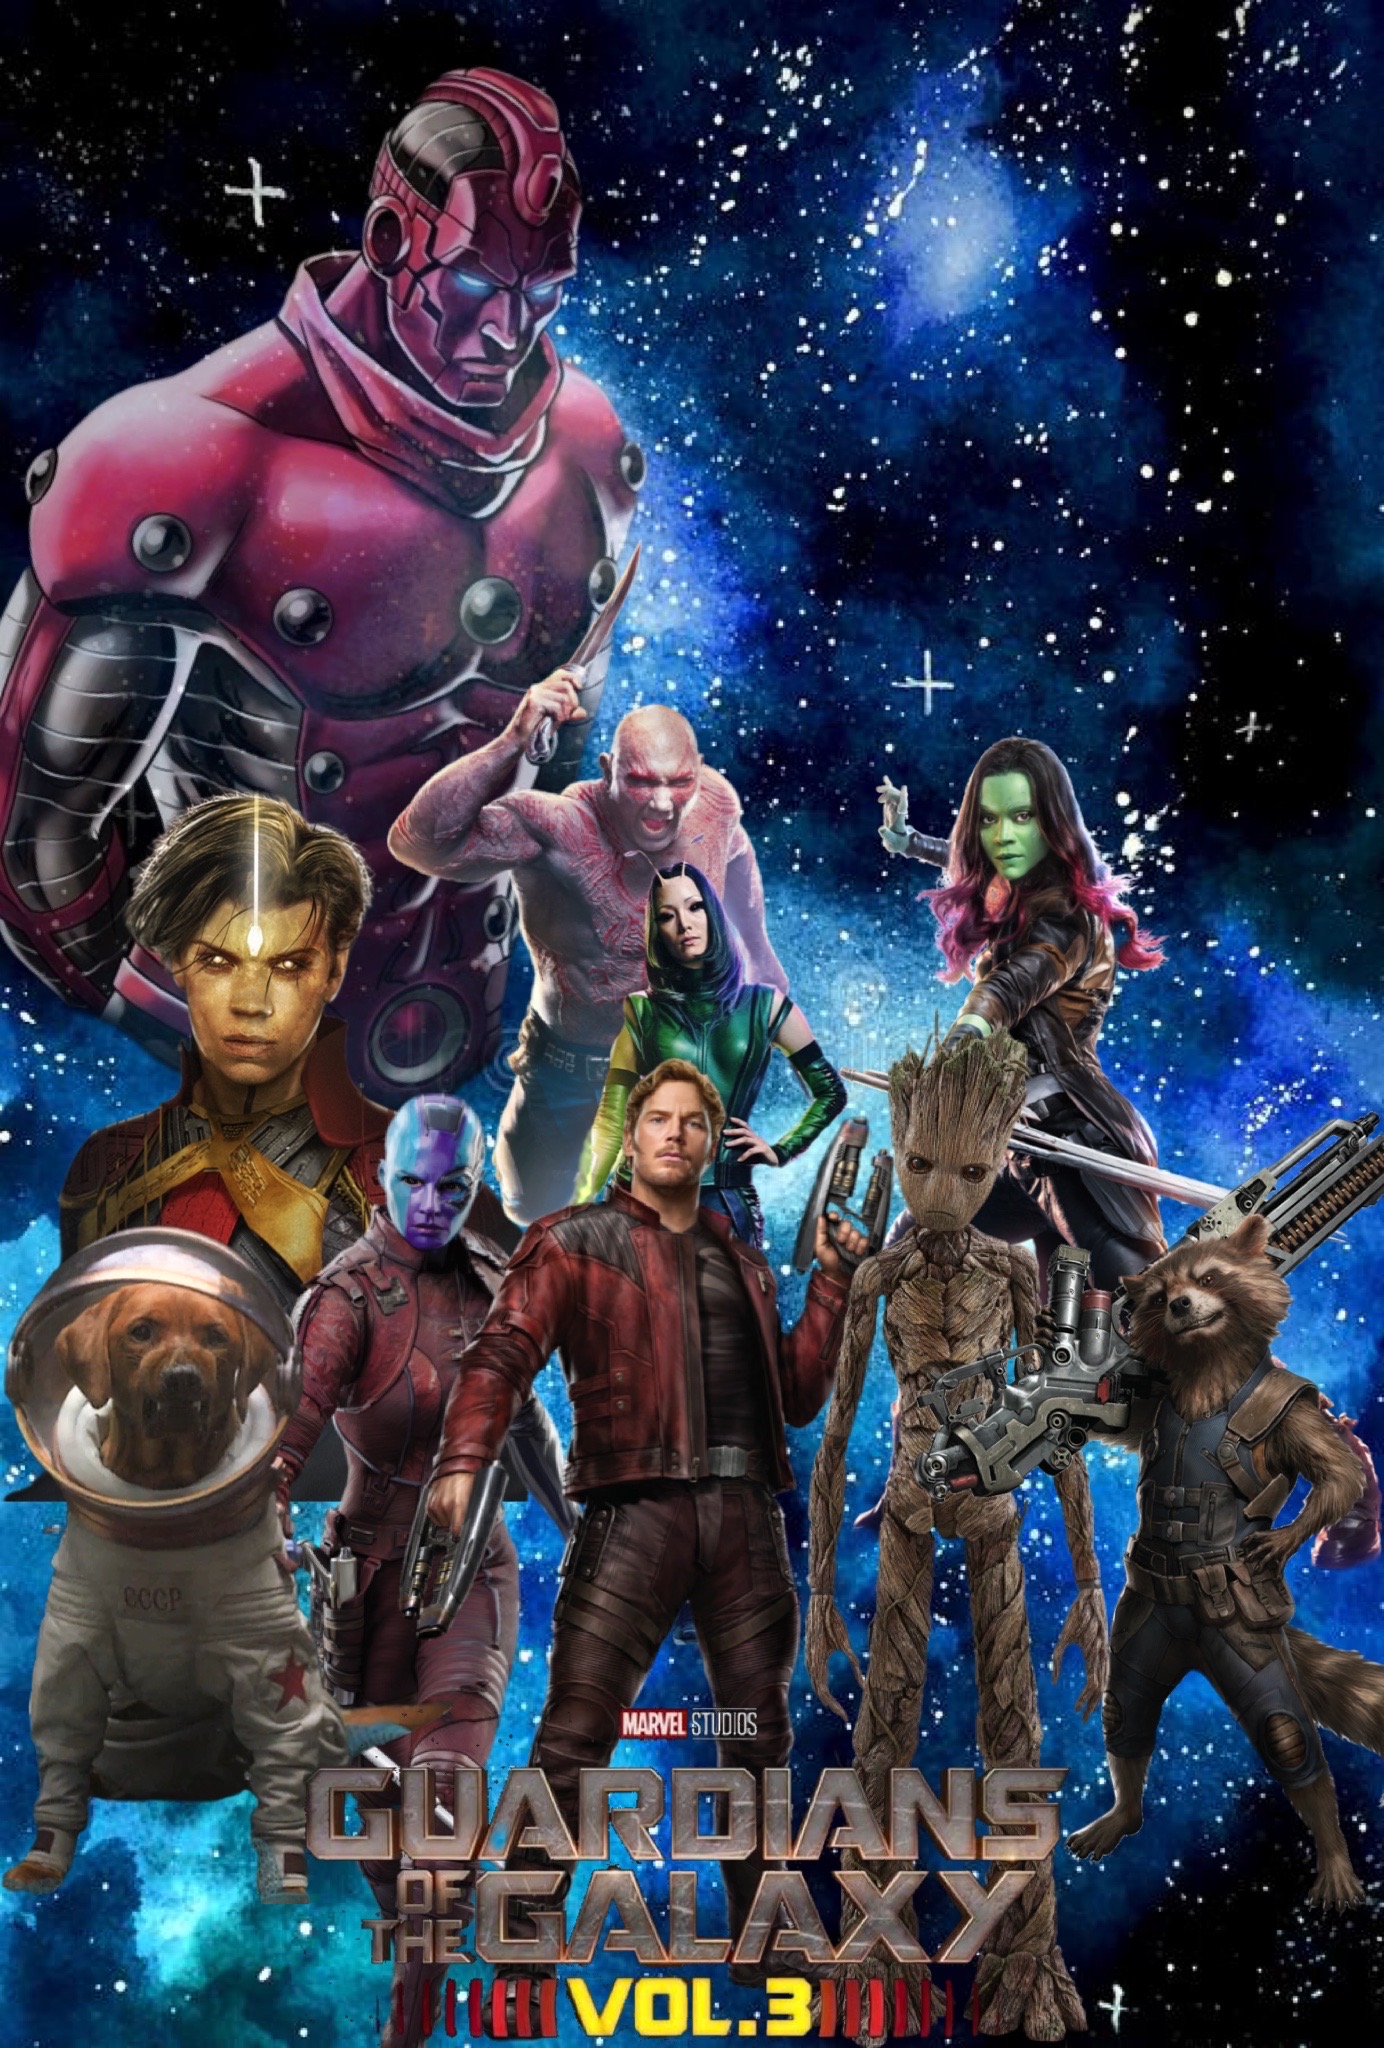 Guardians of the Galaxy vol. 3 Fanmade poster by AwsosomeAndrew20 on  DeviantArt